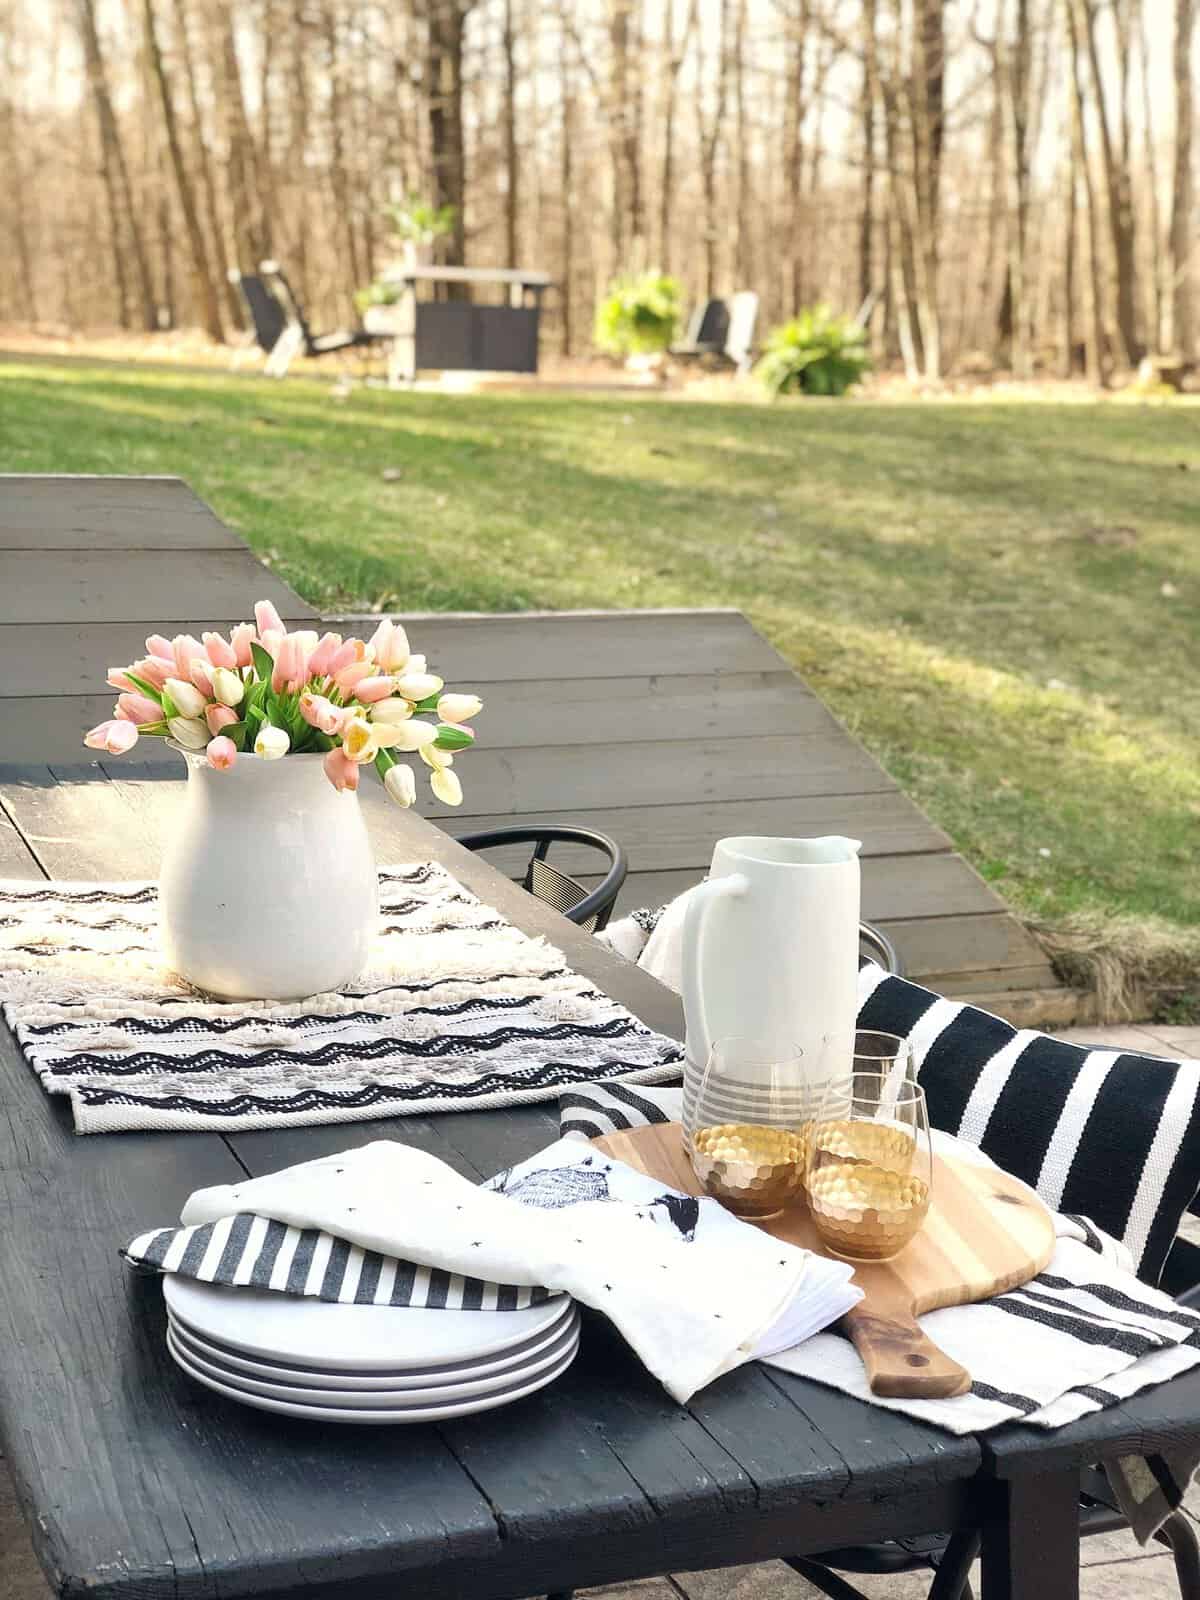 Do you love outdoor entertaining? Today I'm sharing simple ways to style your back patio with durable furniture and effortless decor for easy entertaining. #fromhousetohaven #patiodecor #outdoordining #backpatio